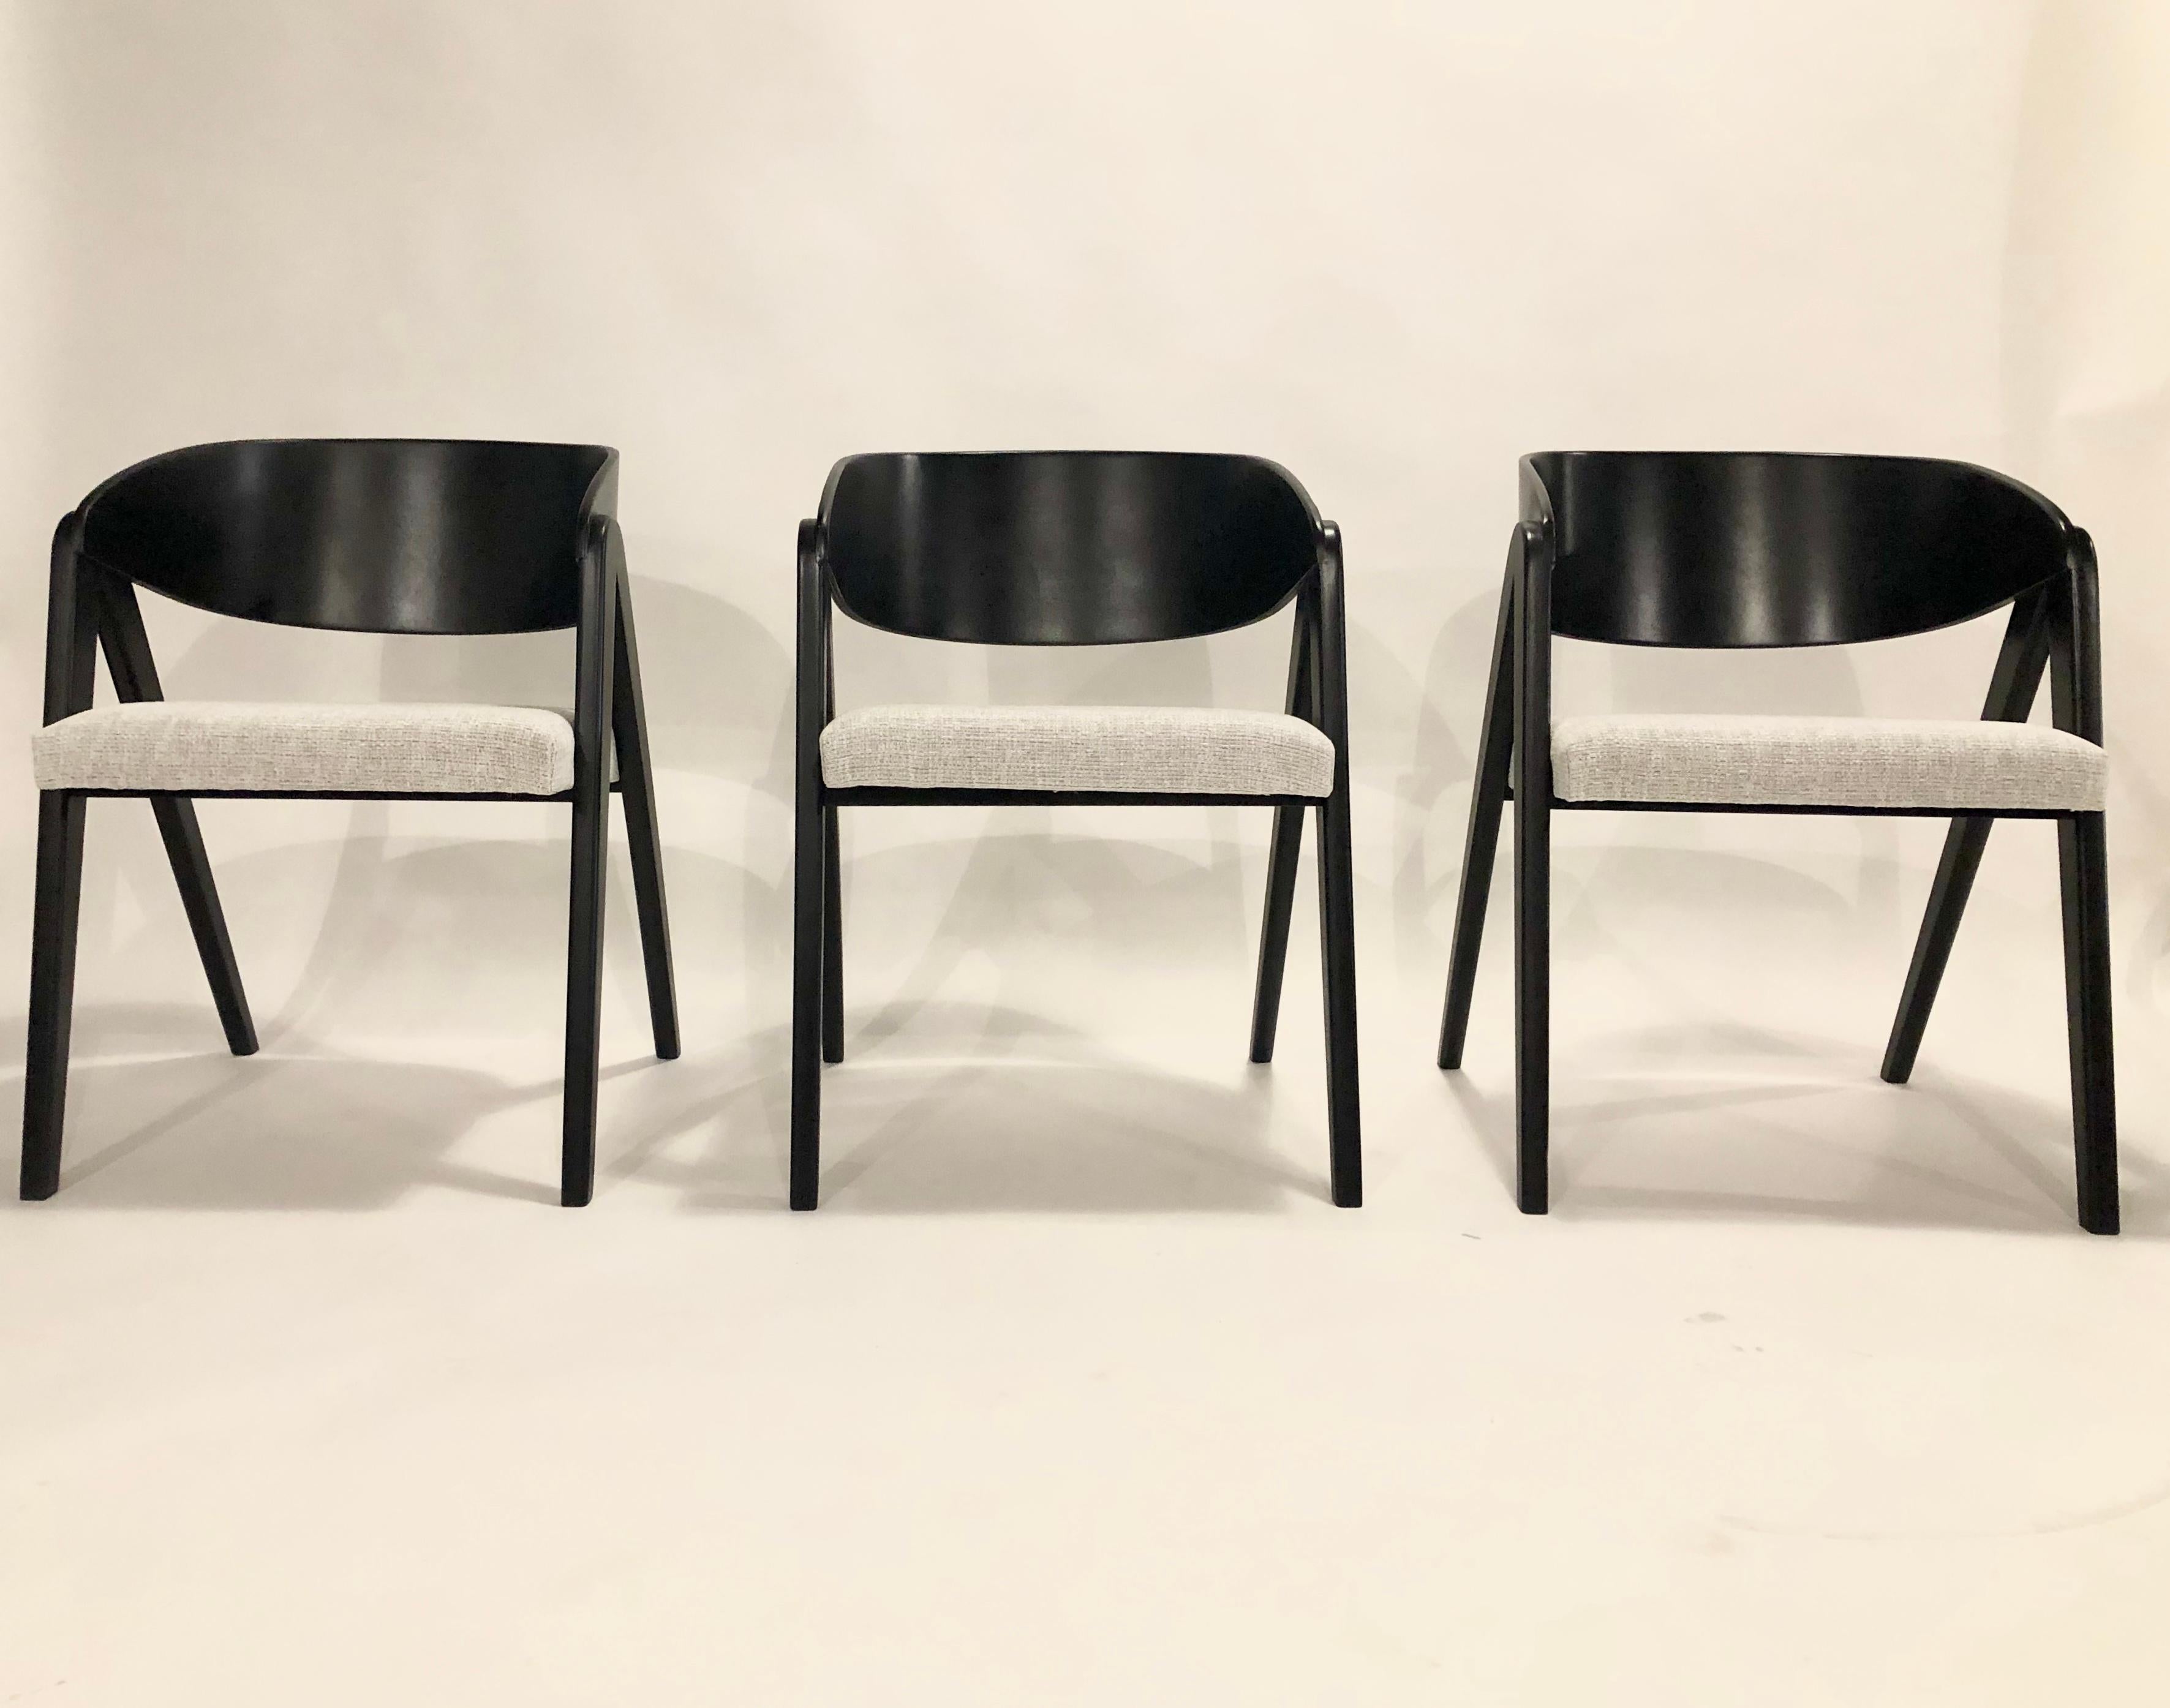 American Midcentury Allan Gould for Herman Miller Compass Chairs